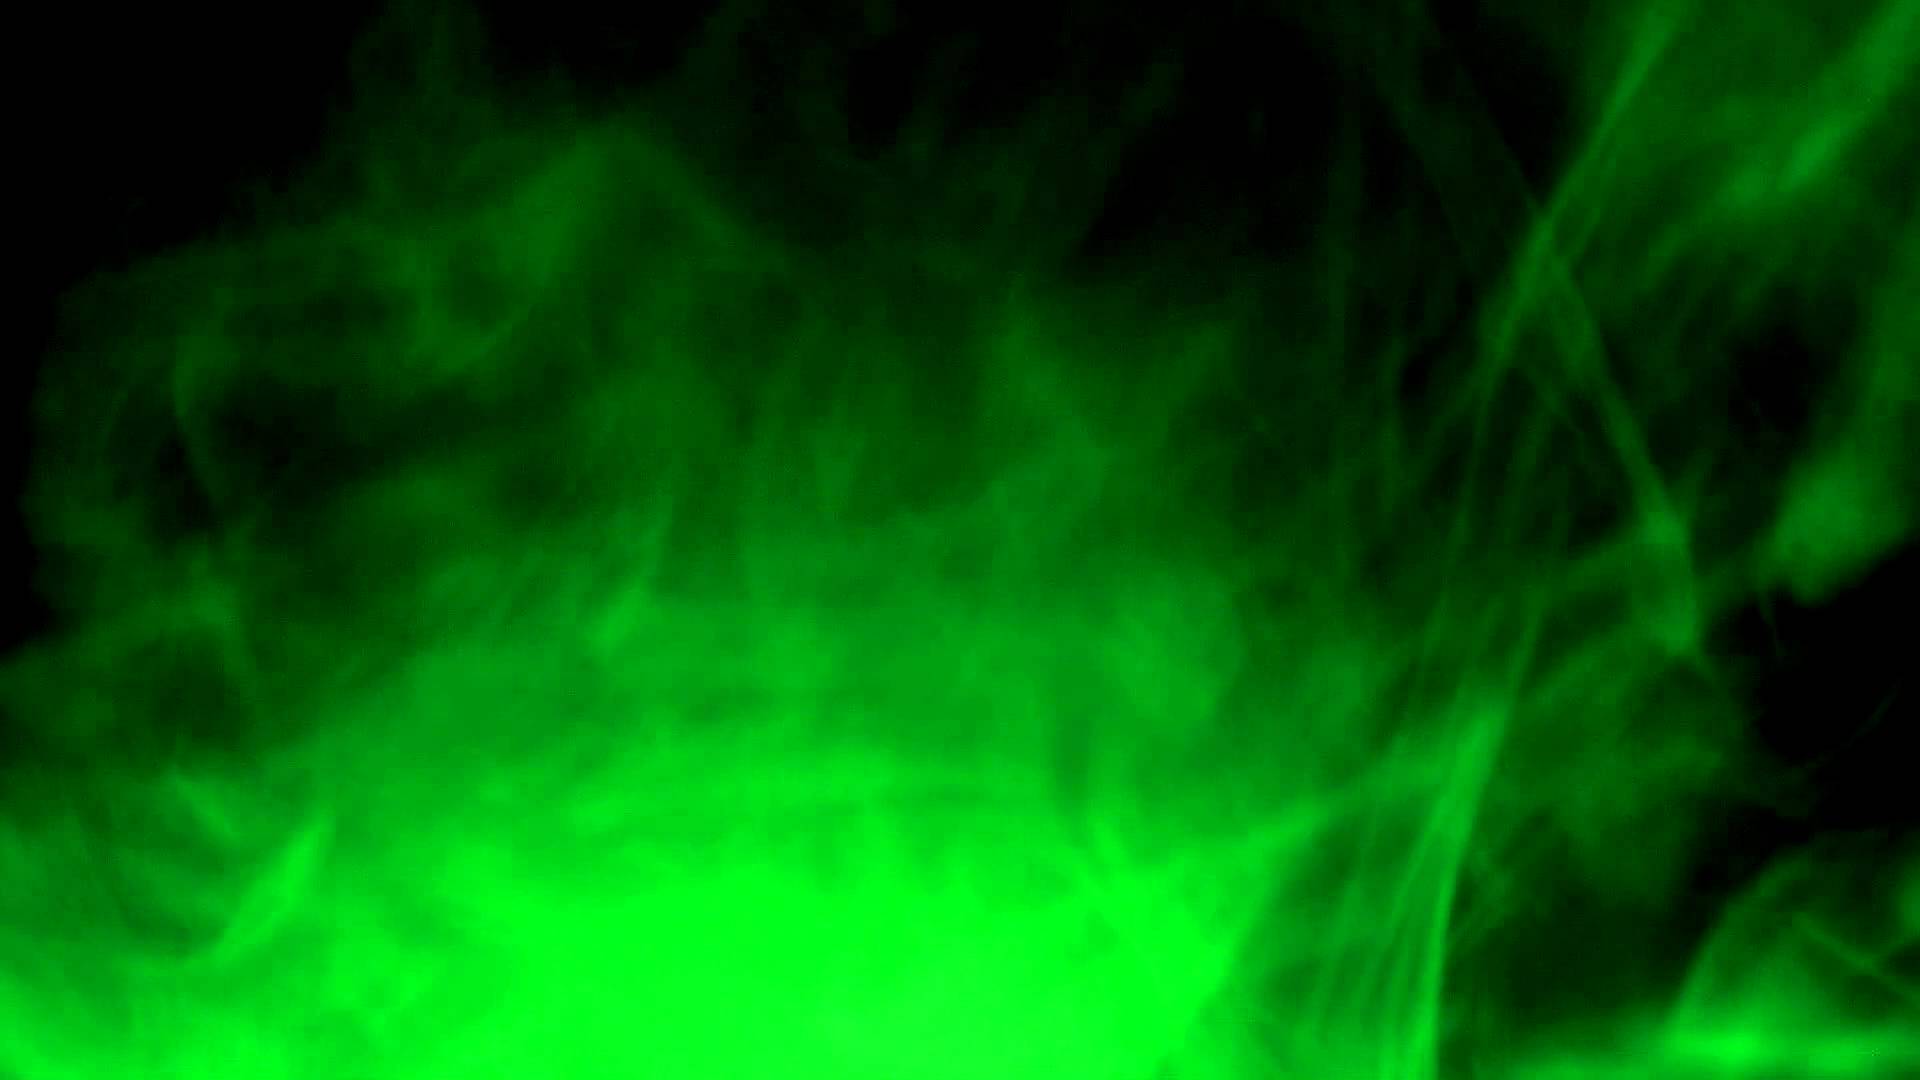 Green Smoke FX' Royalty free Stock Footage HD Video clip - YouTube